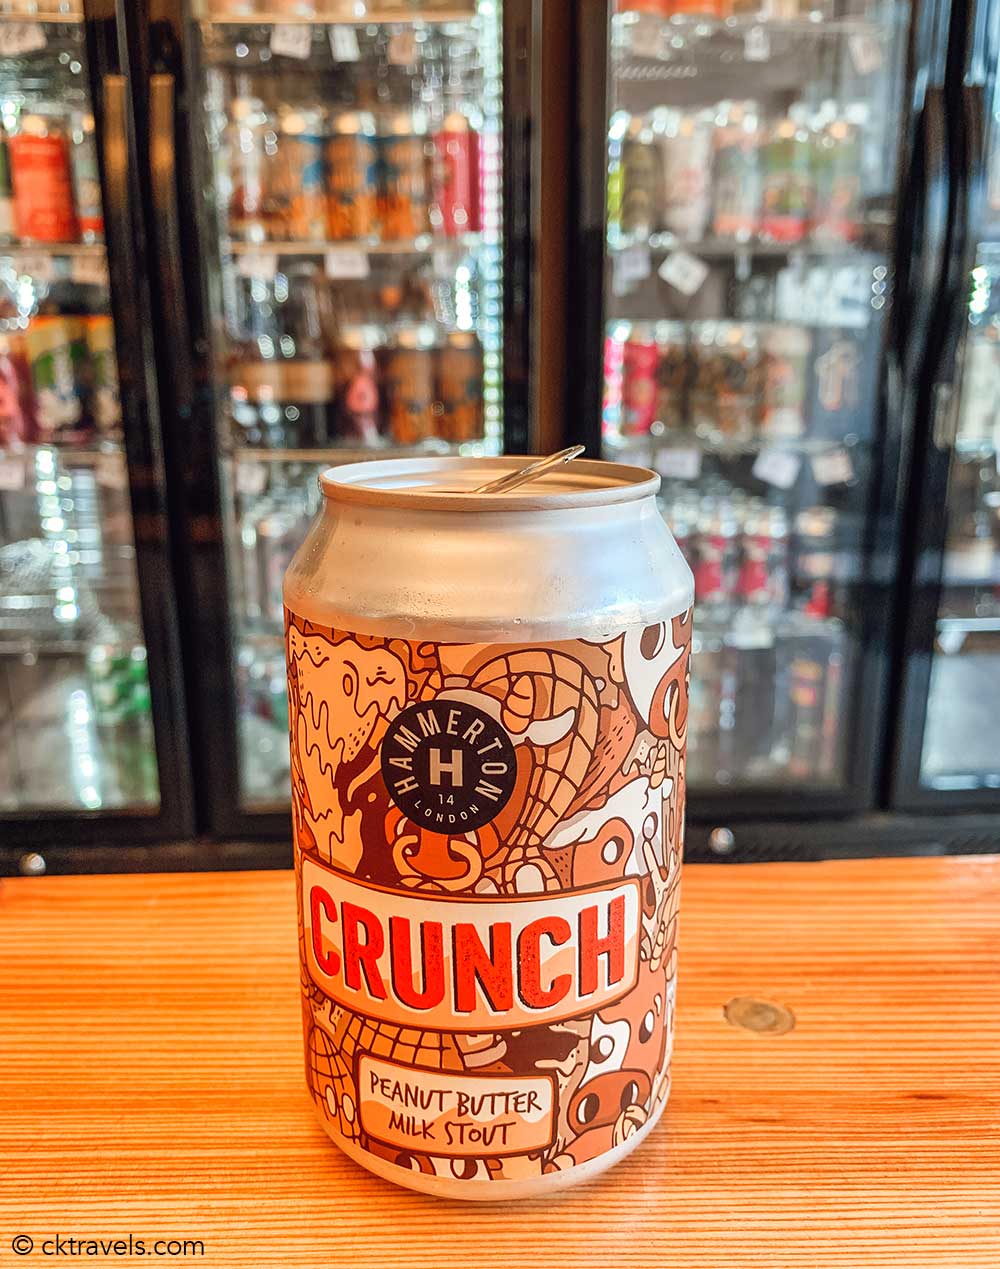 Crunch Hammerton beer. 151 For the Road craft beer and bottle store, Blackhorse Road Walthamstow London 